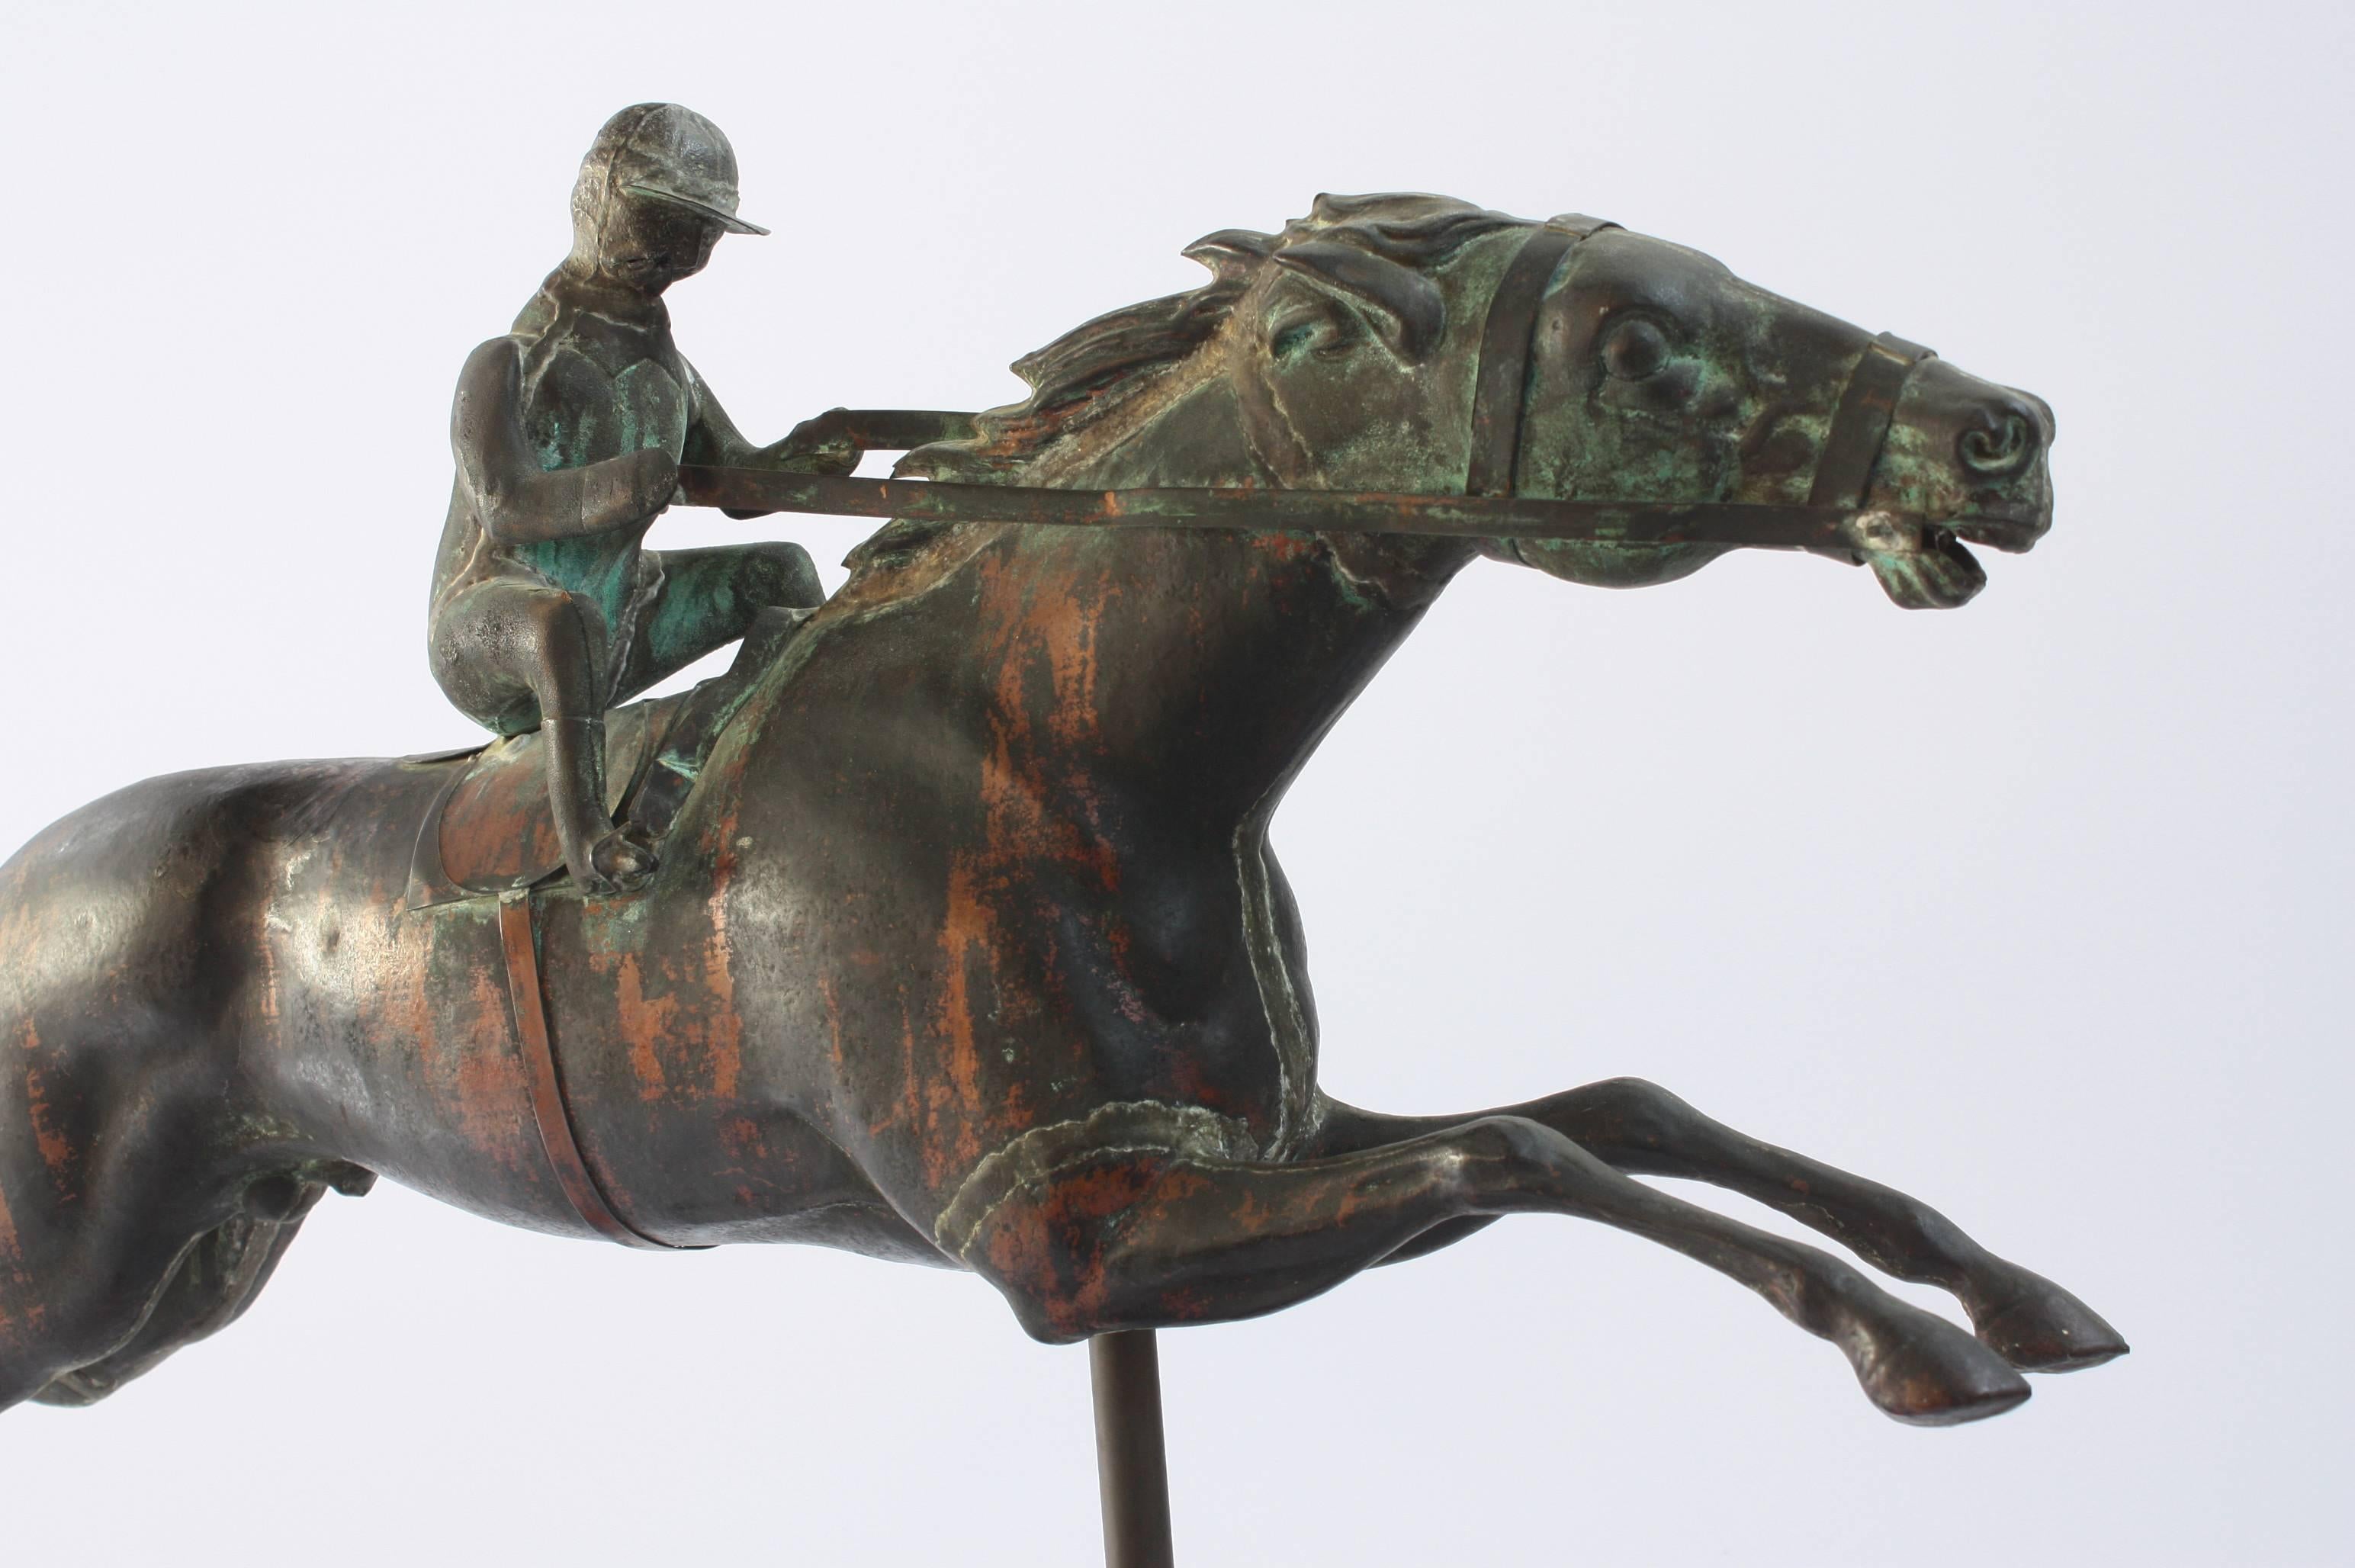 A full-bodied horse and rider or jockey weathervane with a moulded copper body and cast zinc heads, displayed on custom wooden stand or base

J. W. Fiske & Company of New York City was the most prominent American manufacturer of decorative cast